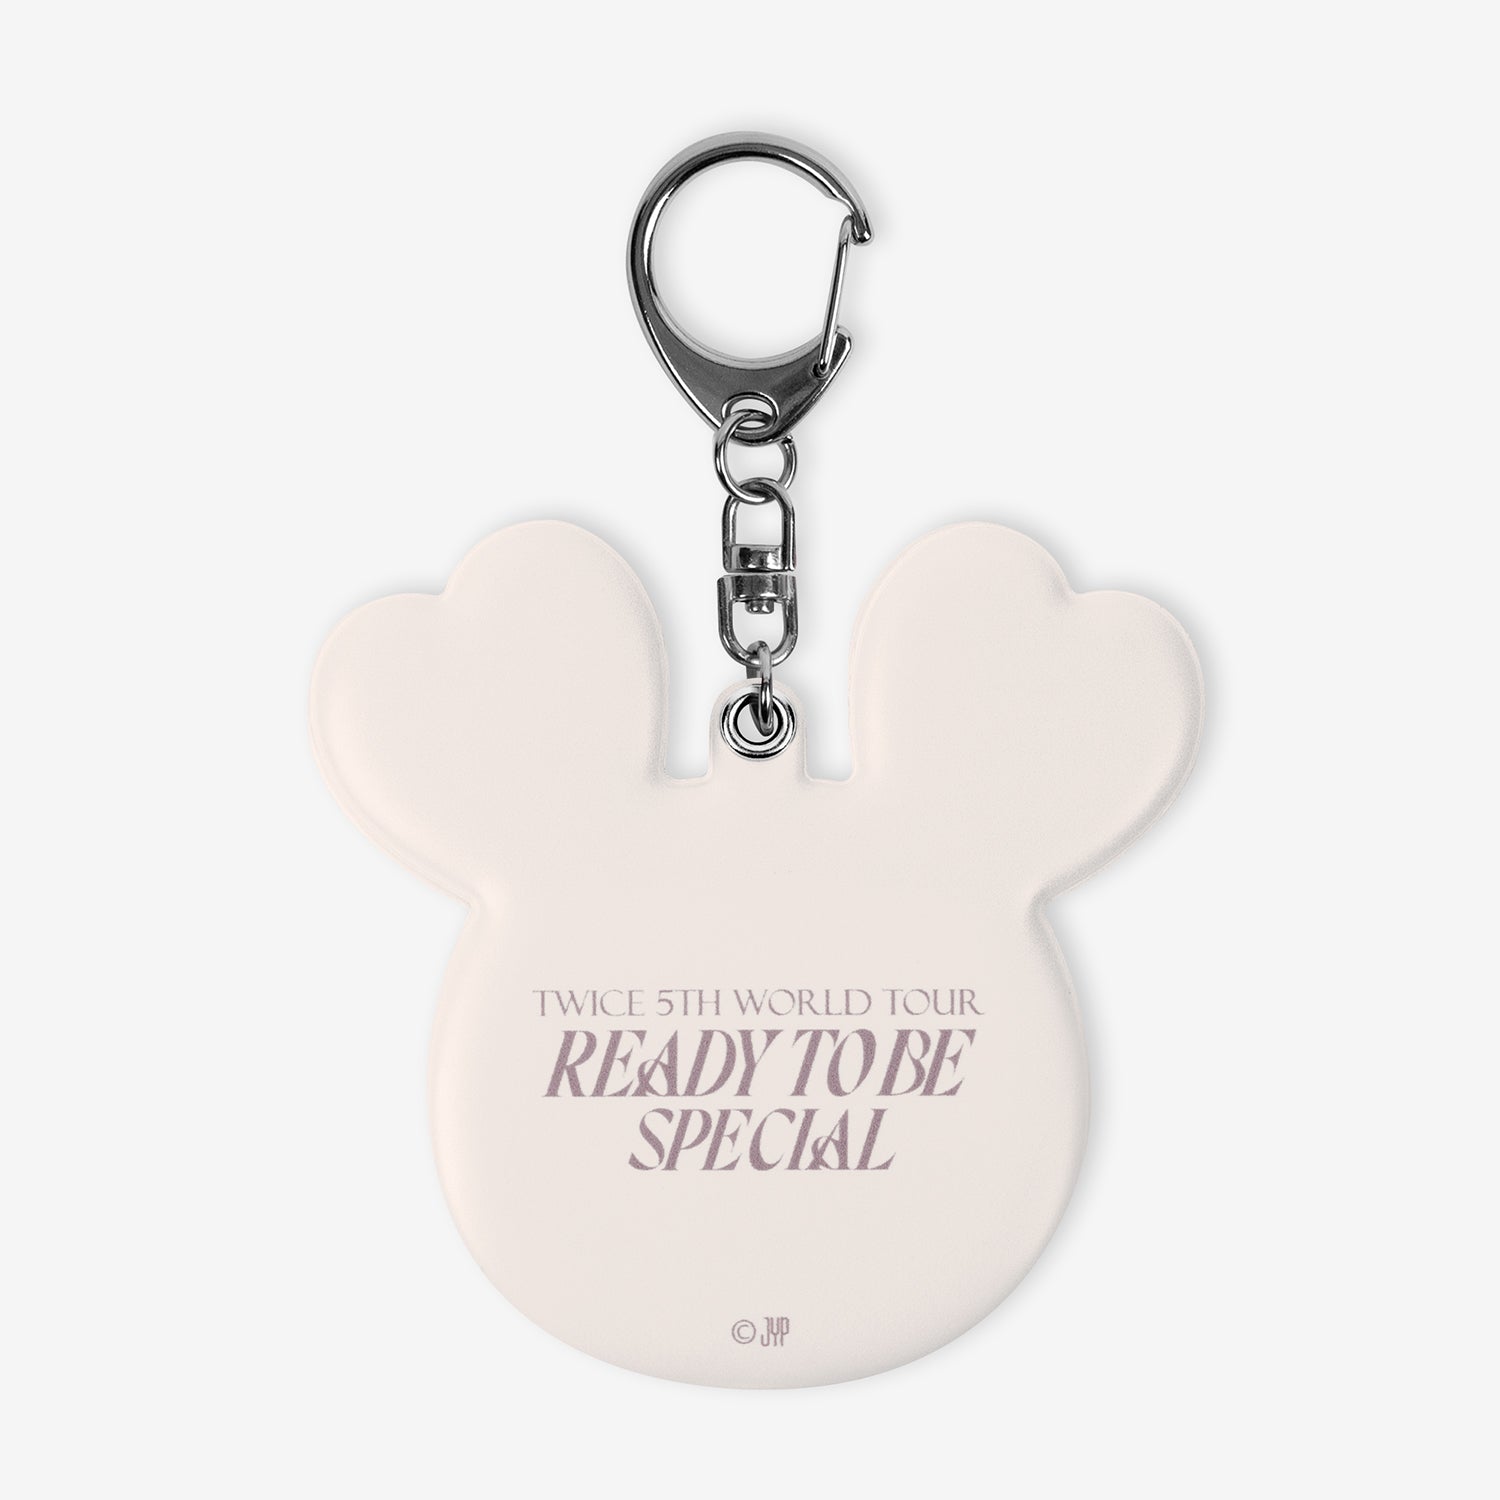 TWICE LOVELYS SLIDE MIRROR - DAVELY / TWICE『READY TO BE SPECIAL』